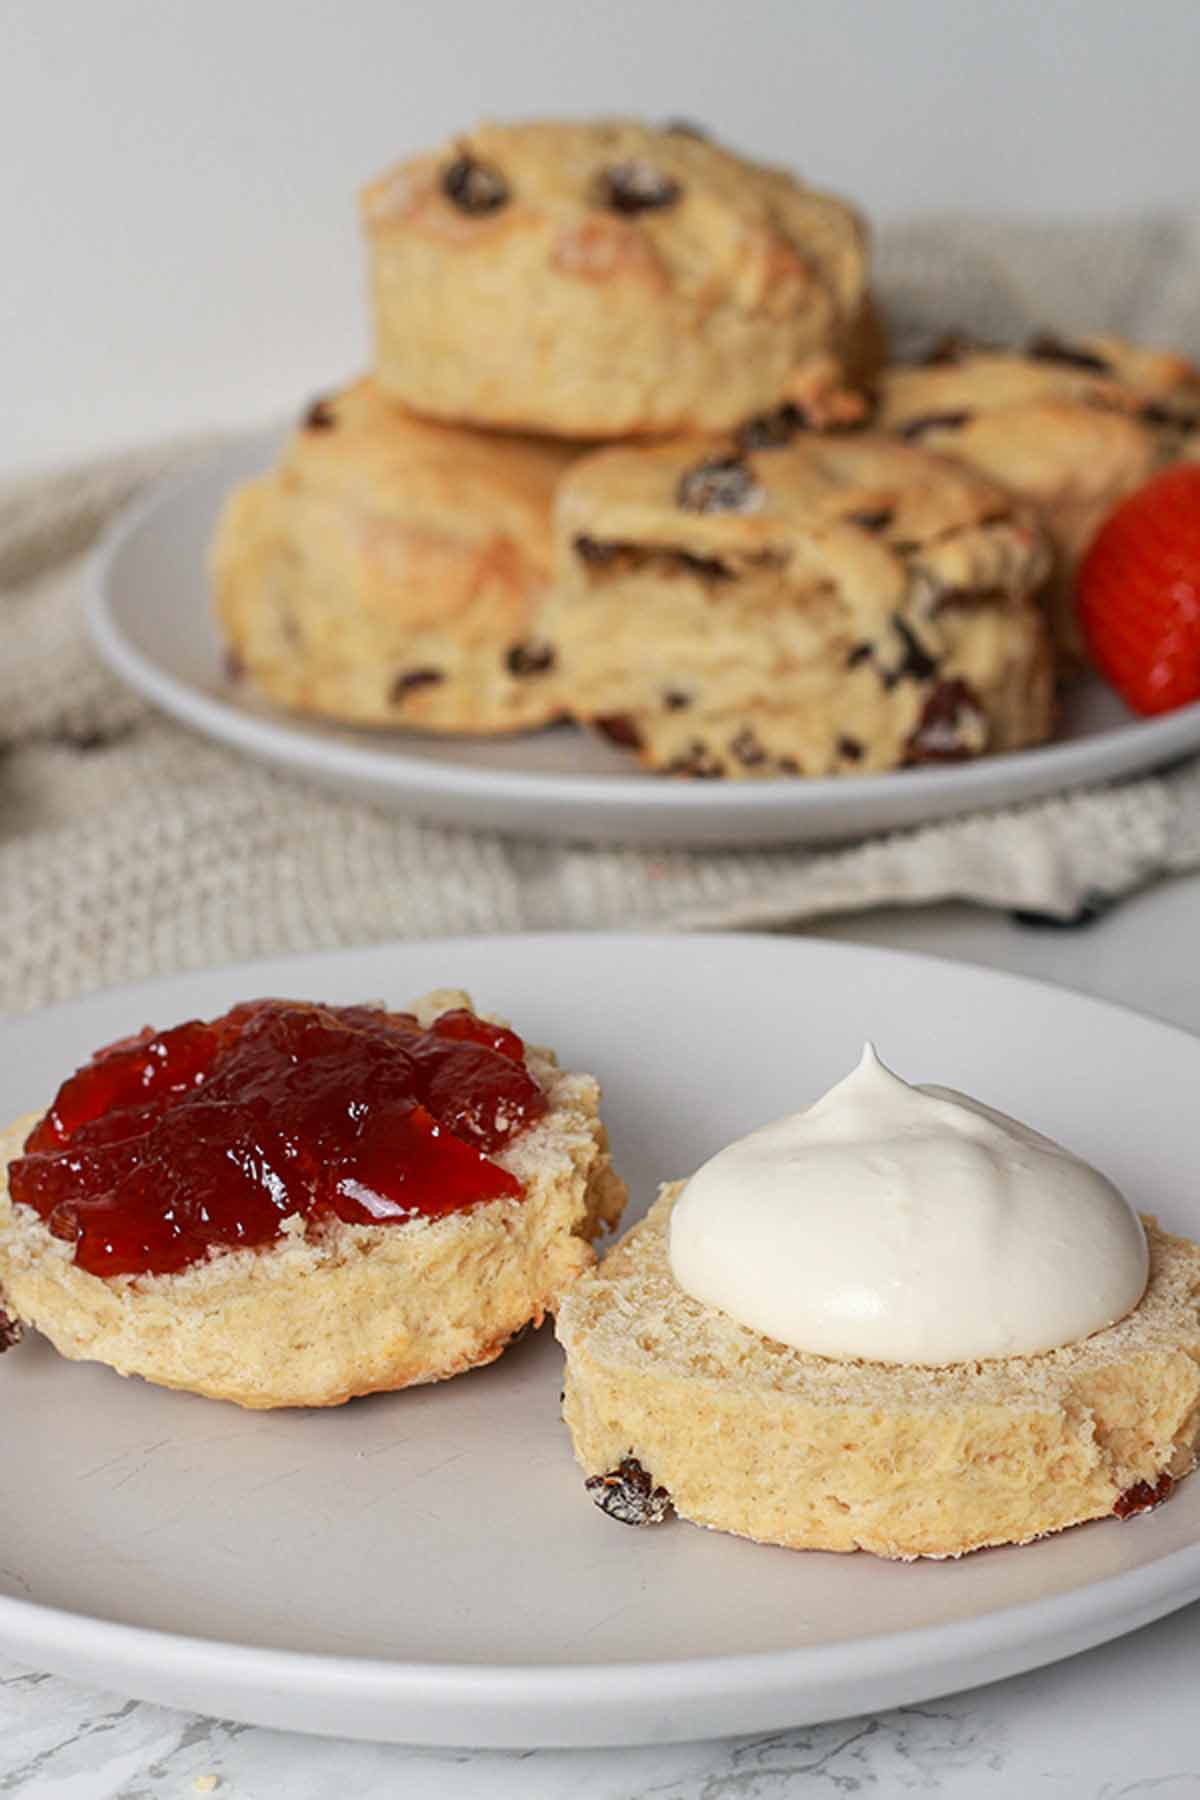 Dairy Free Scone Cut In Half. One Half Is Topped With Cream And The Other Half Is Topped With Jam.